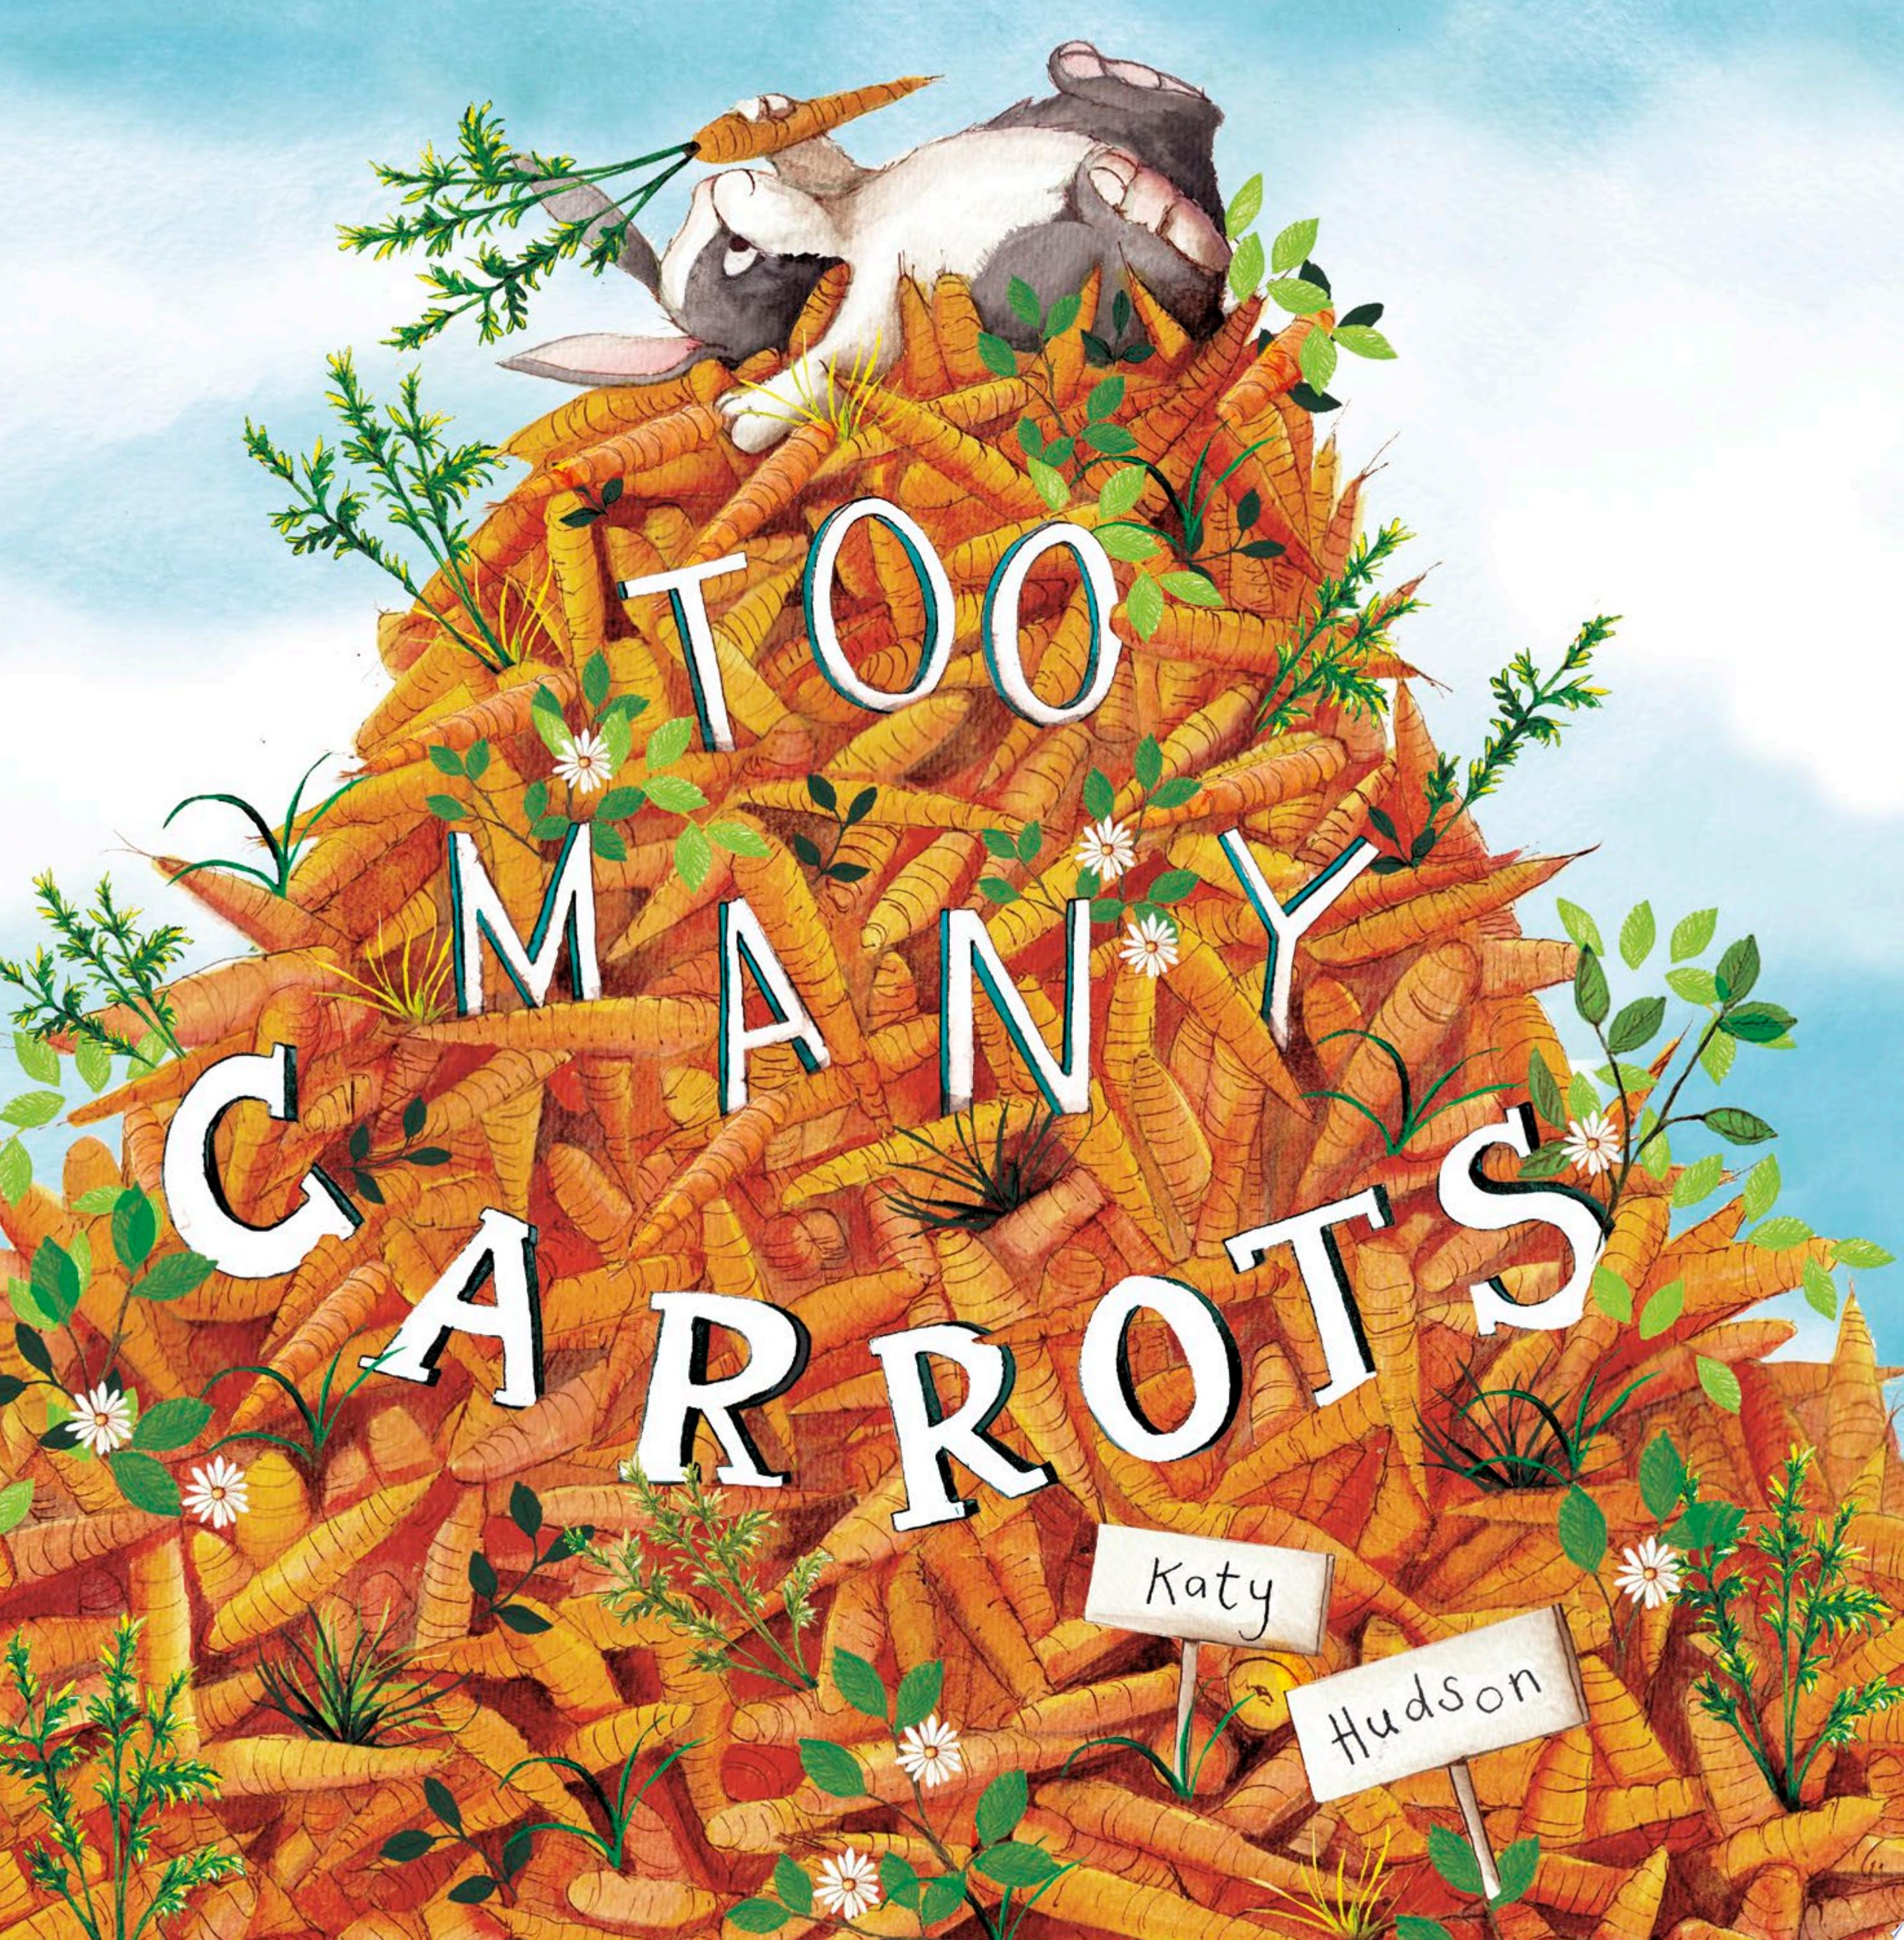 Image for "Too Many Carrots"